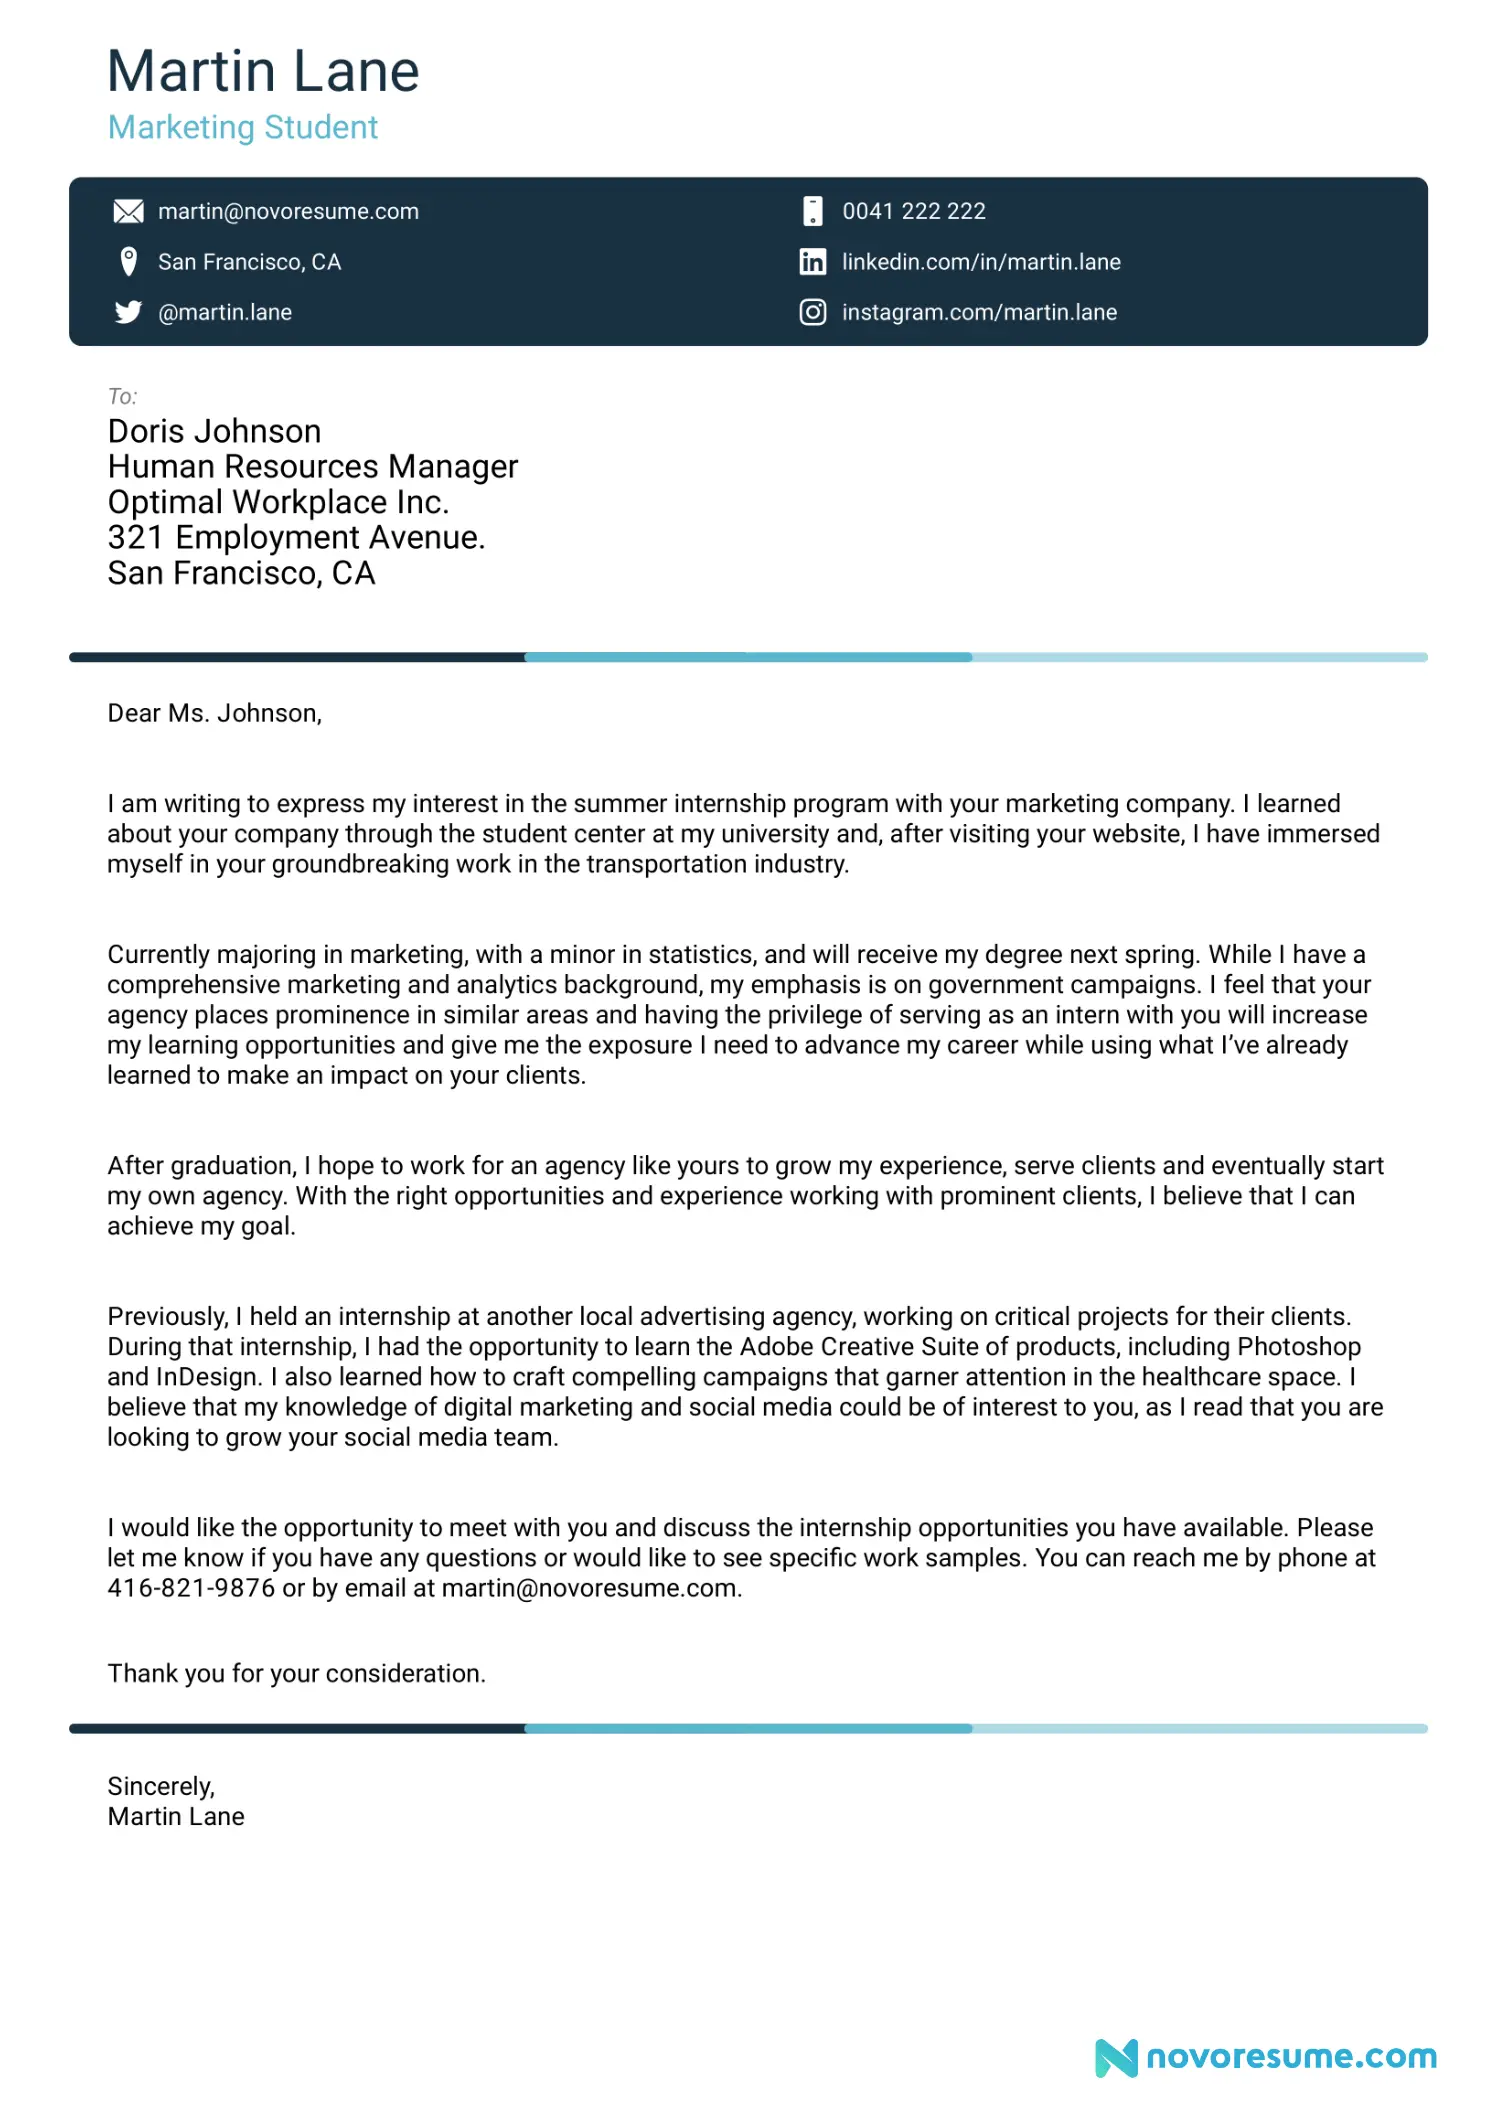 Cover Letter Example for Student/Graduate